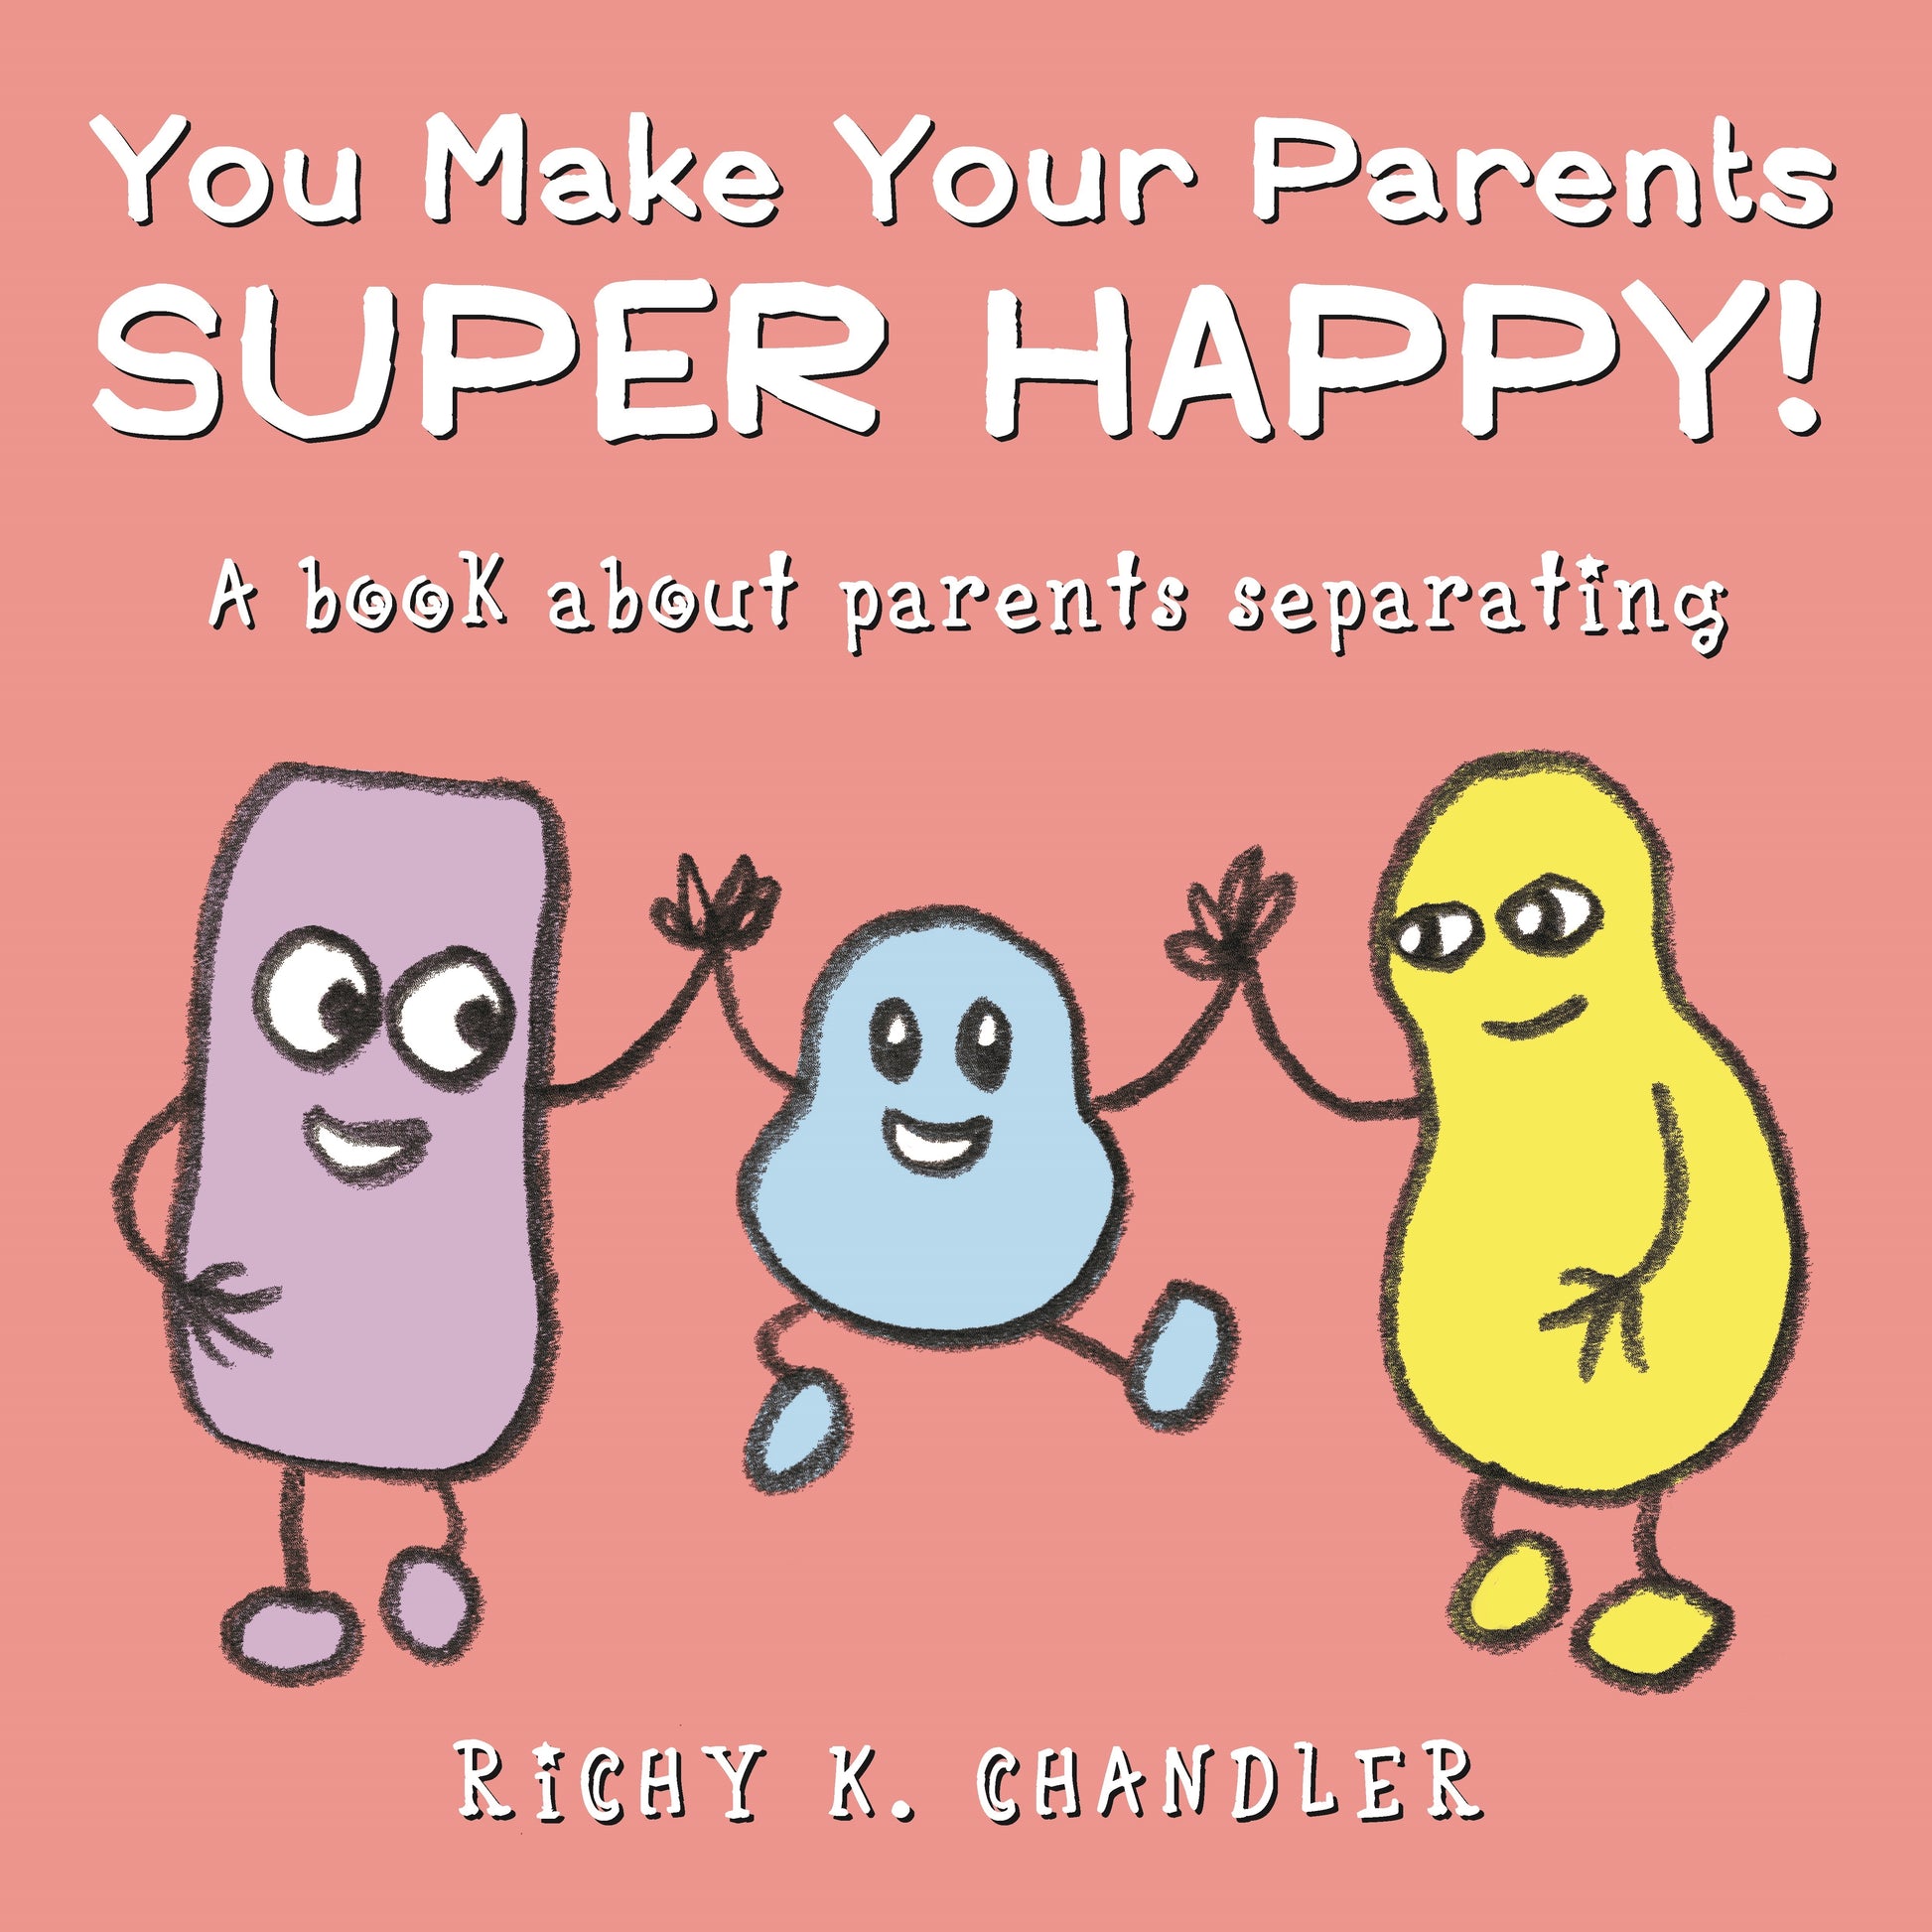 You Make Your Parents Super Happy! by Richy K. Chandler, Richy K. Chandler